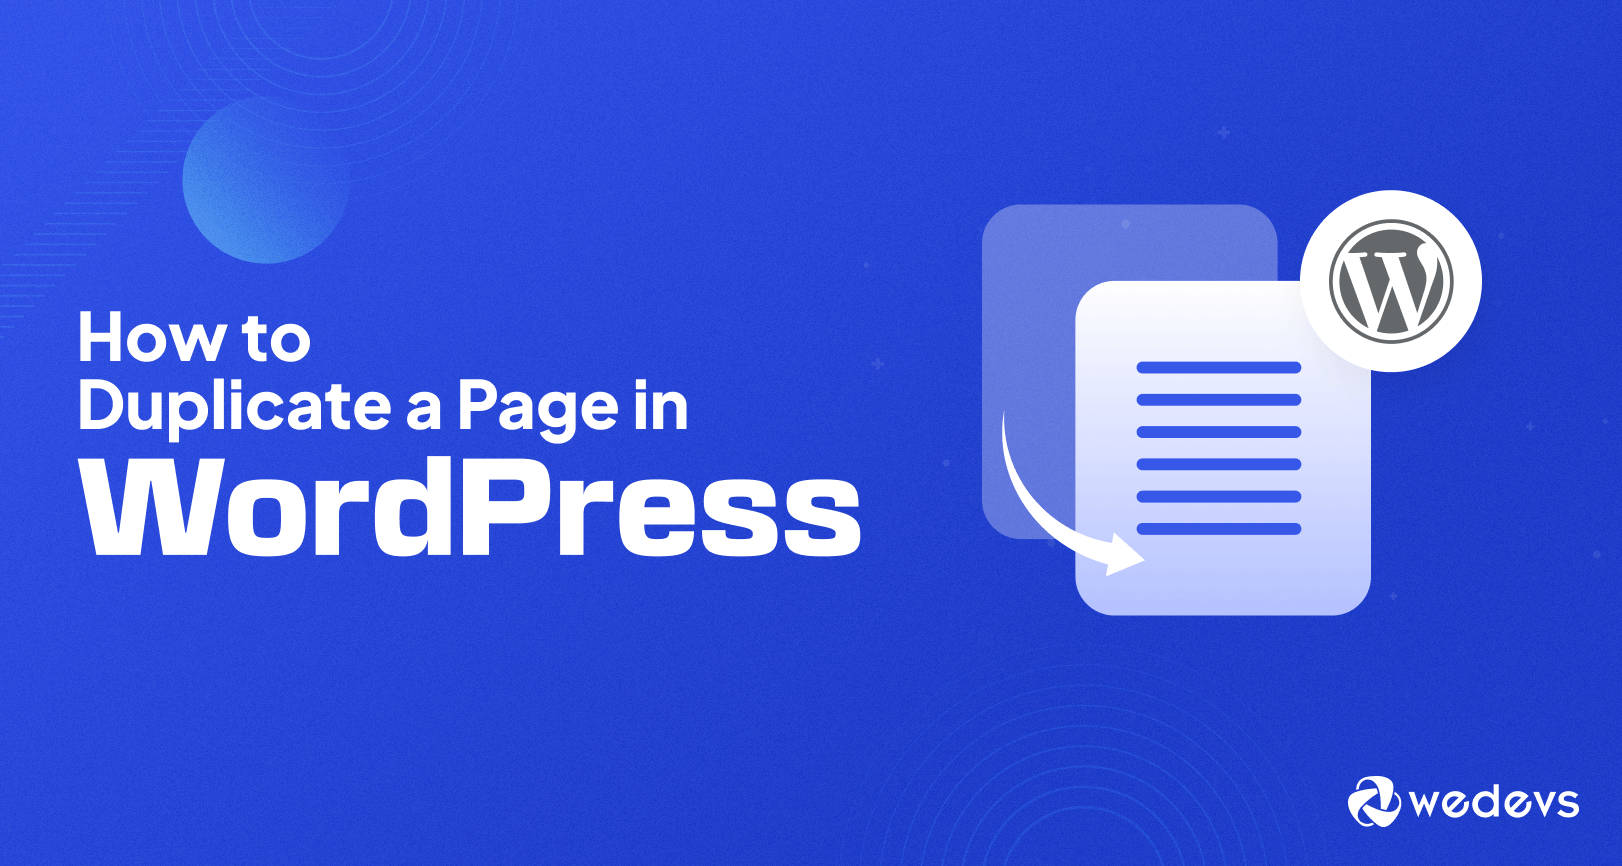 How to Duplicate Pages in WordPress: The Easy Way